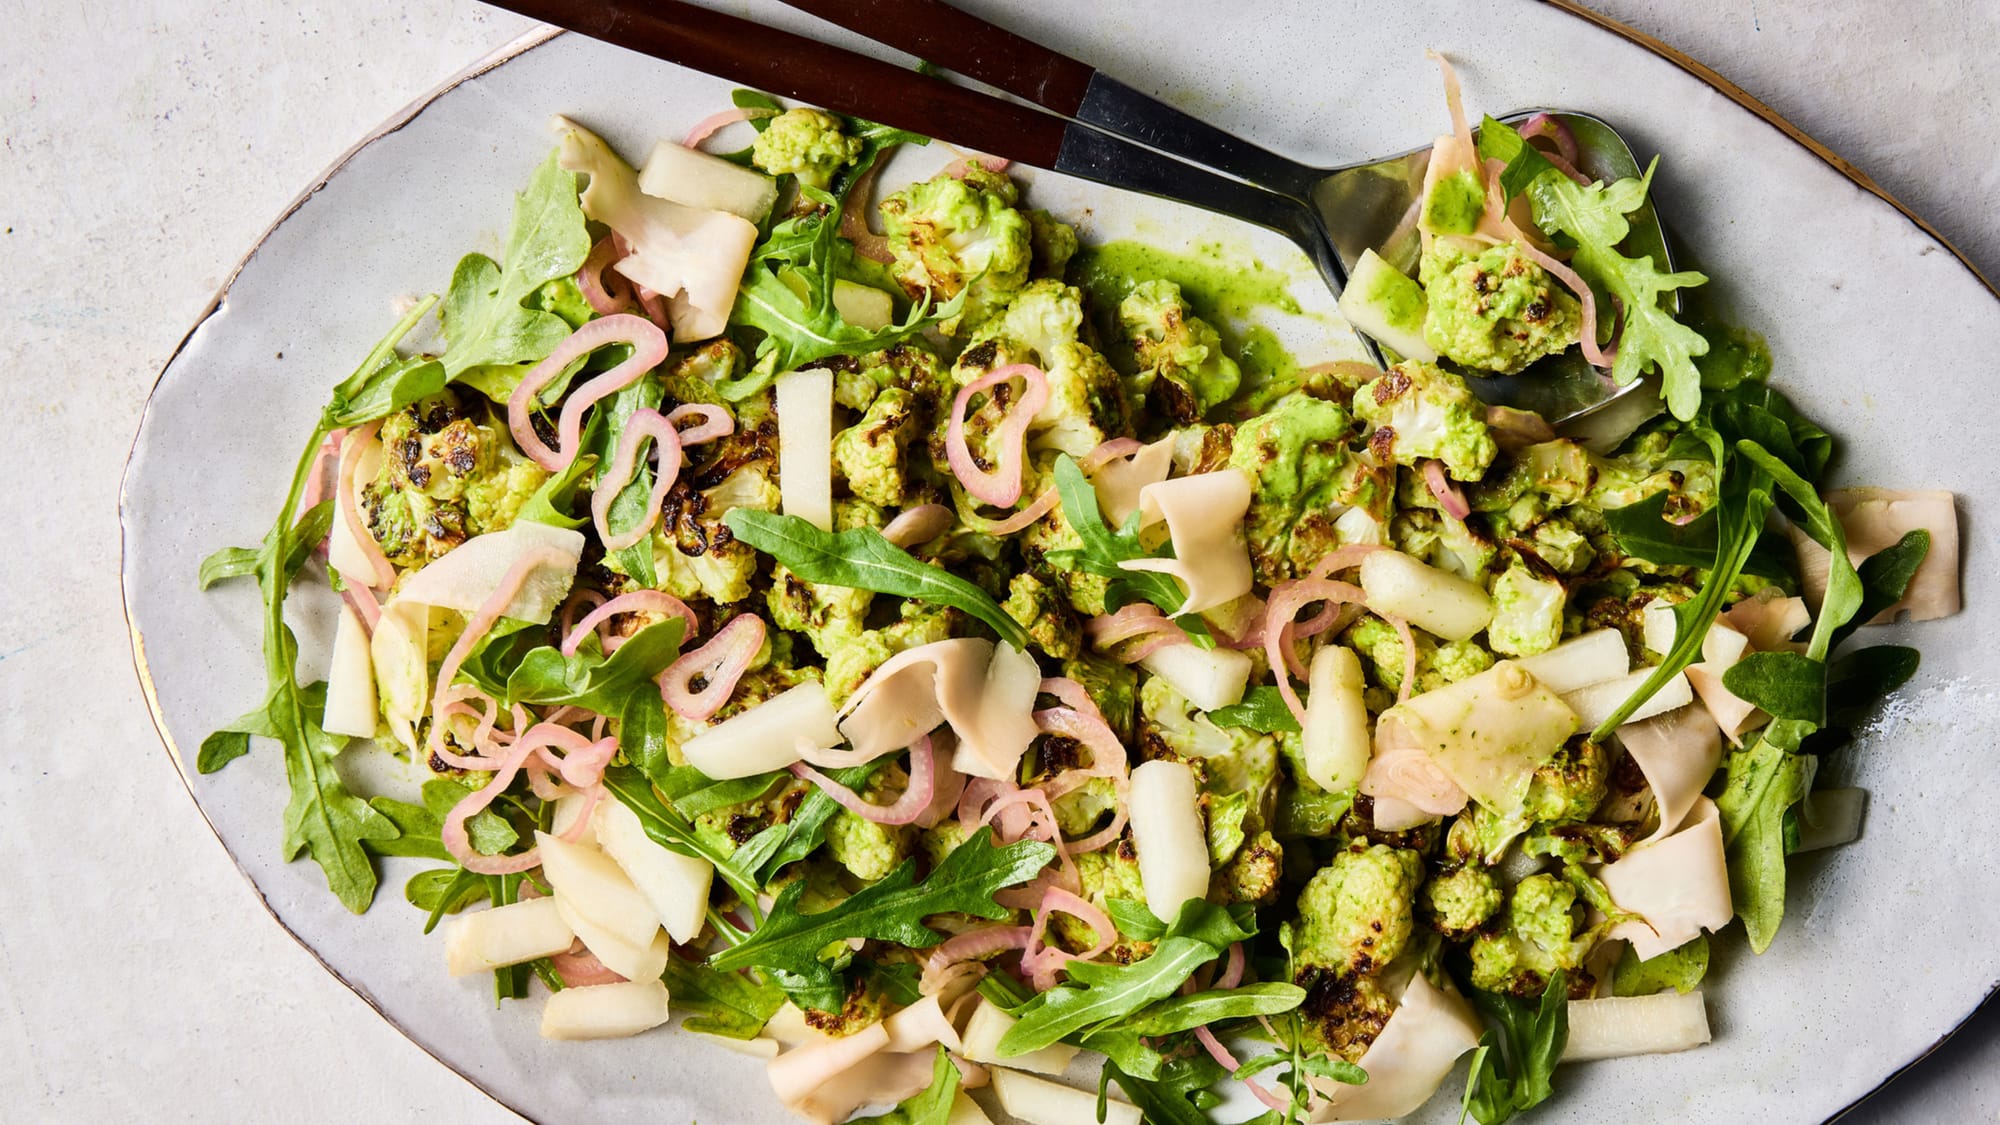 Hearty brassica is the ideal base for a festive, make-ahead salad